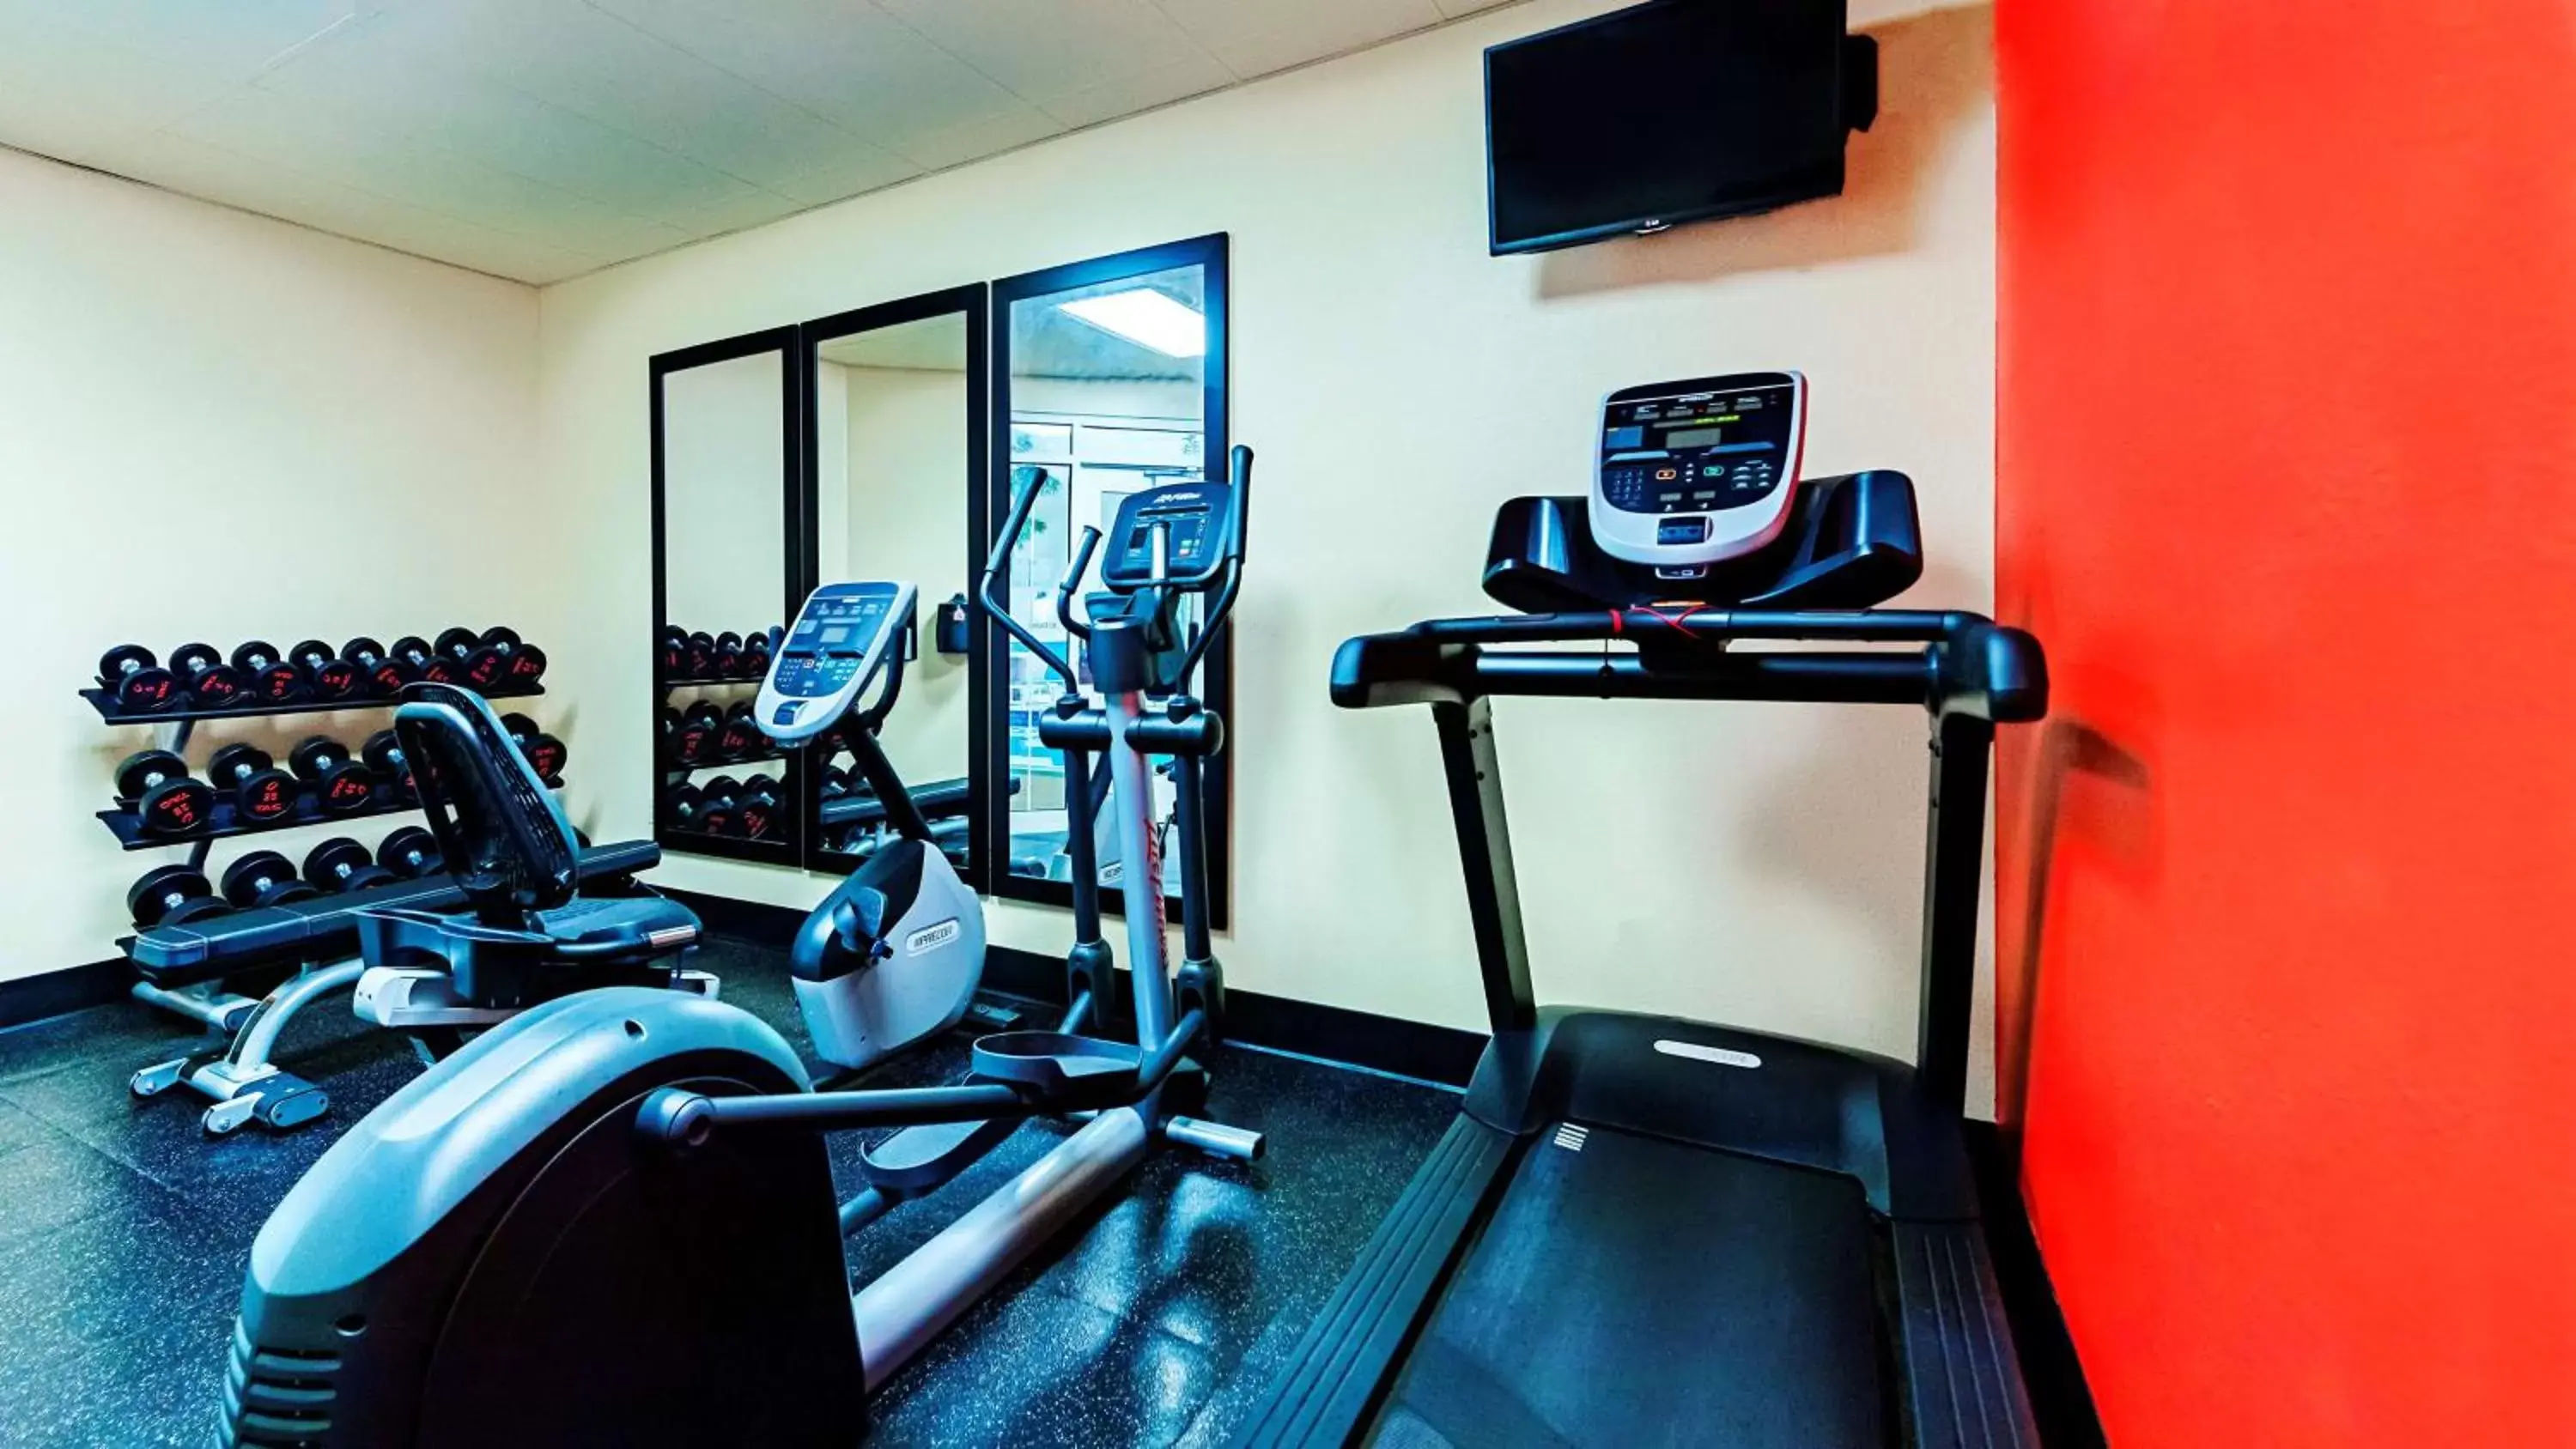 Activities, Fitness Center/Facilities in Country Inn & Suites by Radisson, Appleton, WI